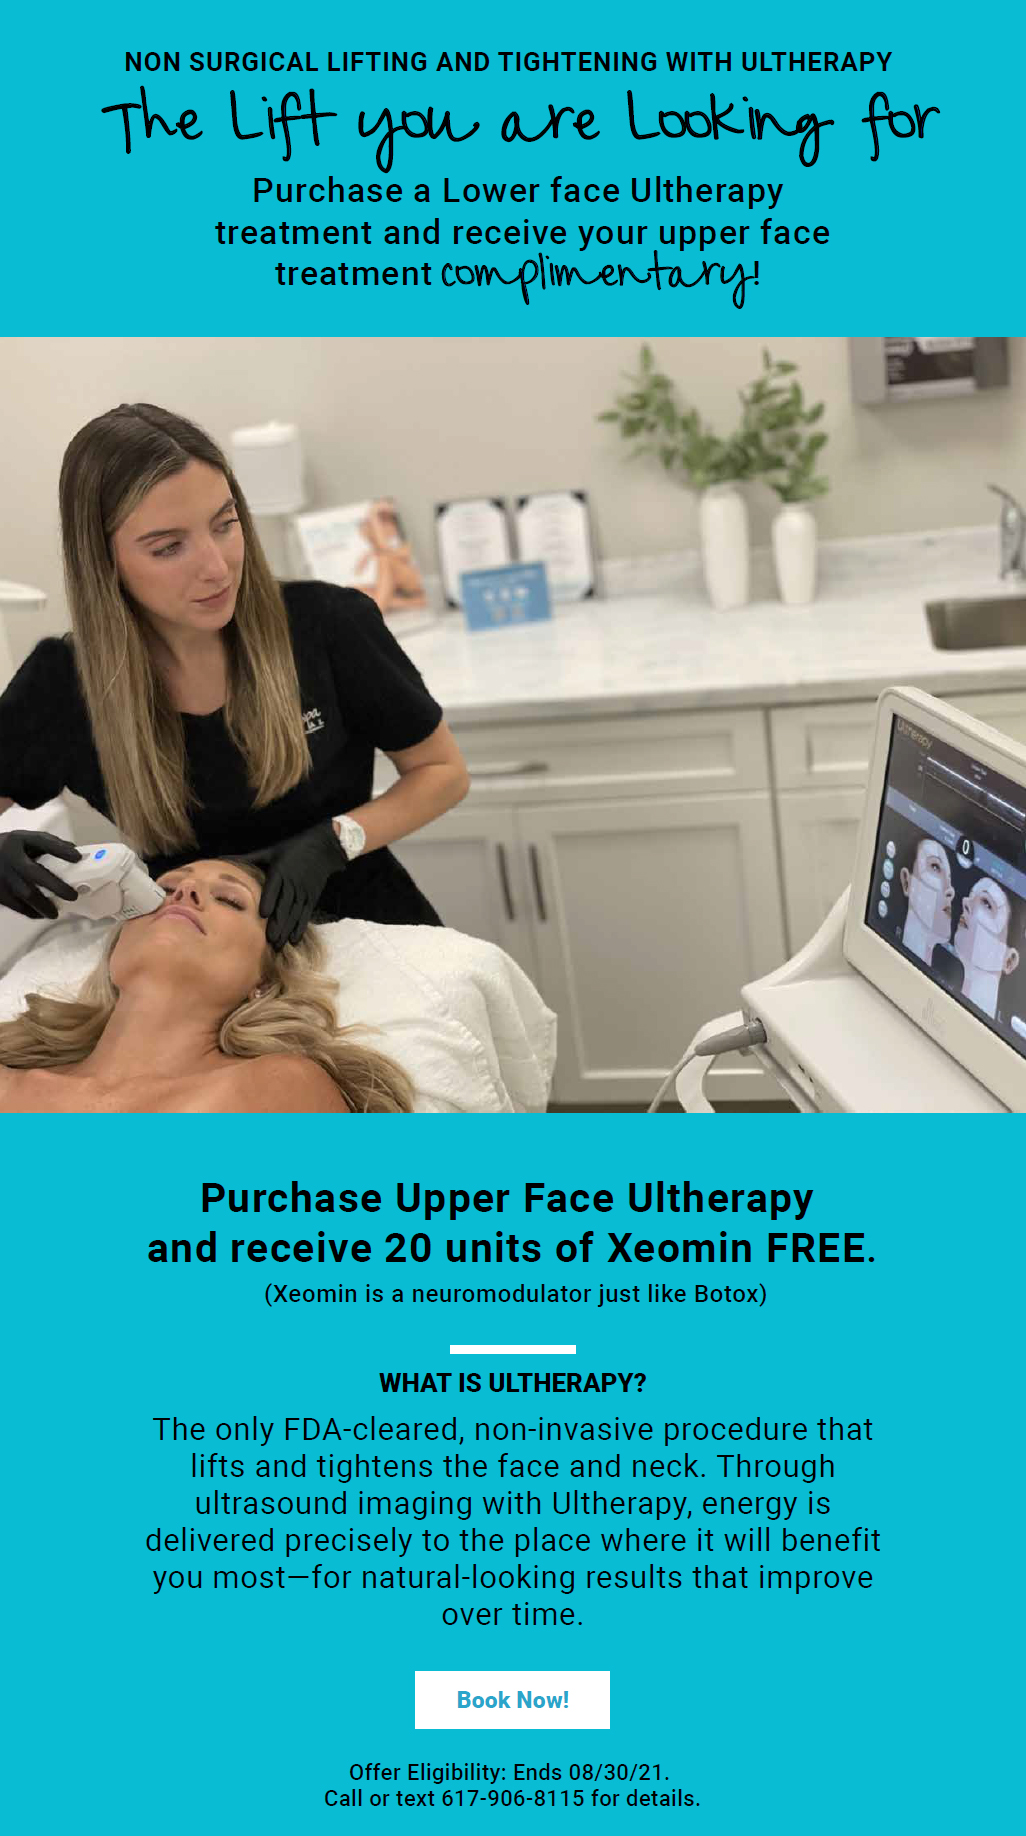 Dream Spa Medical Blog | Non-Surgical Face Lifting and Tightening with Ultherapy